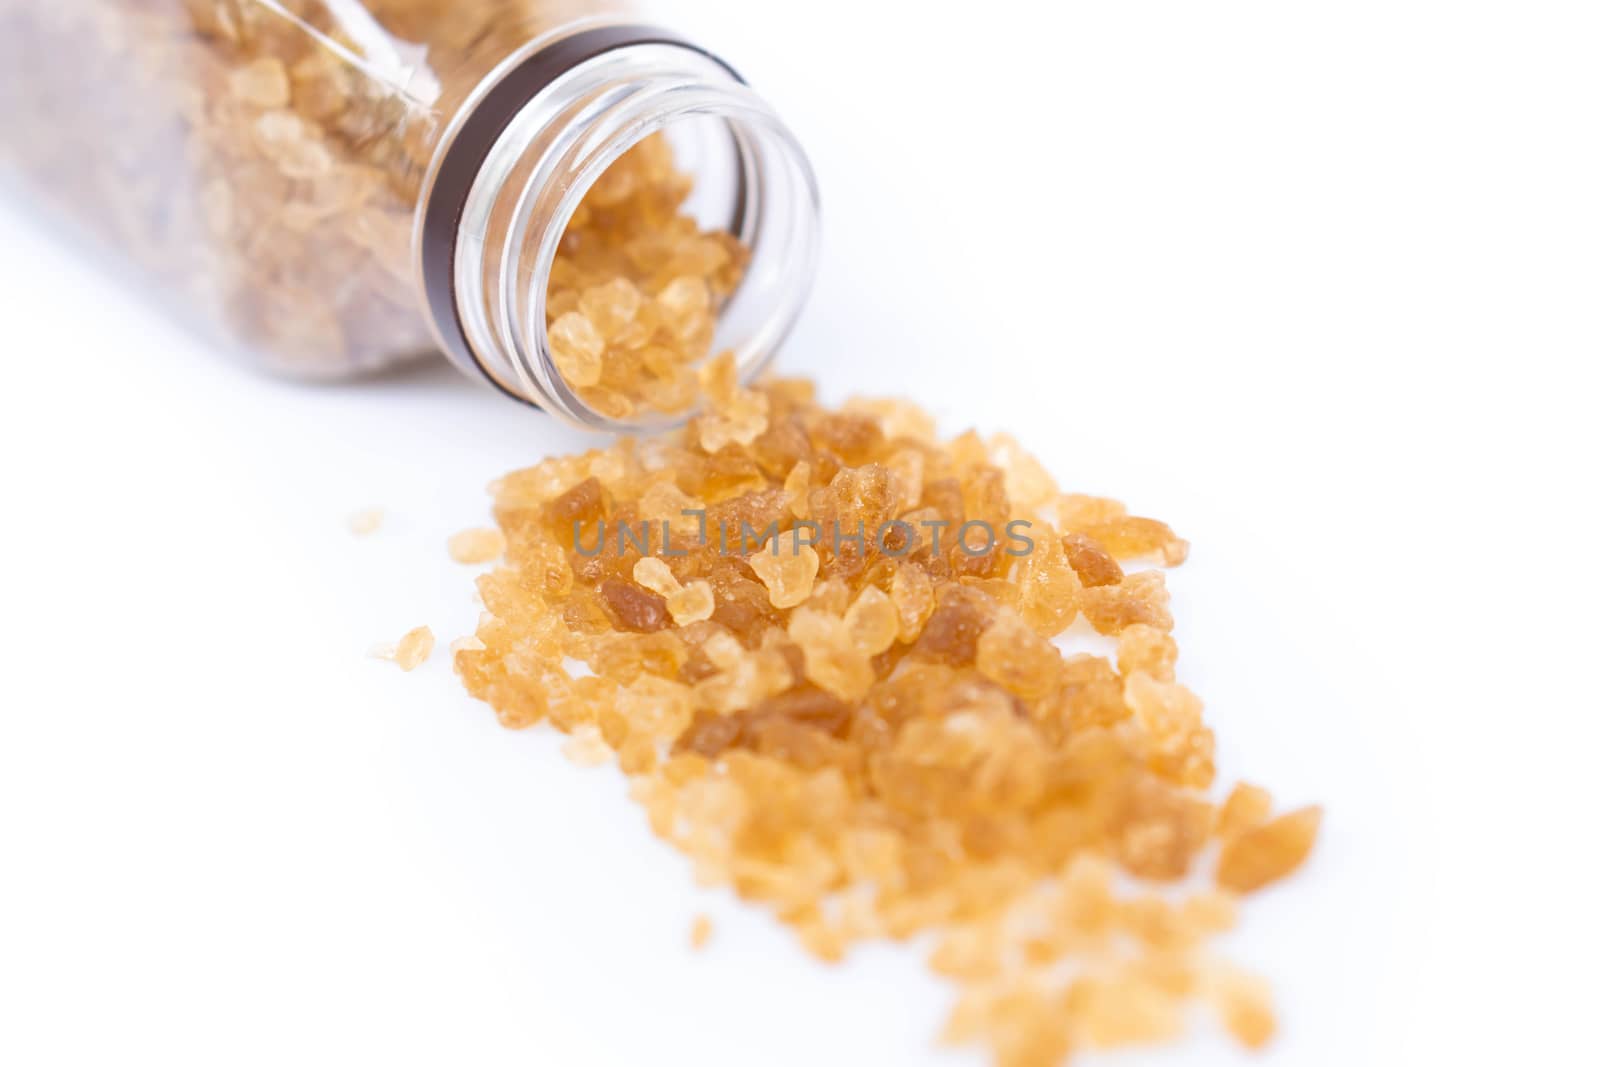 Closeup brown sugar with bottle on white background, healthy con by pt.pongsak@gmail.com